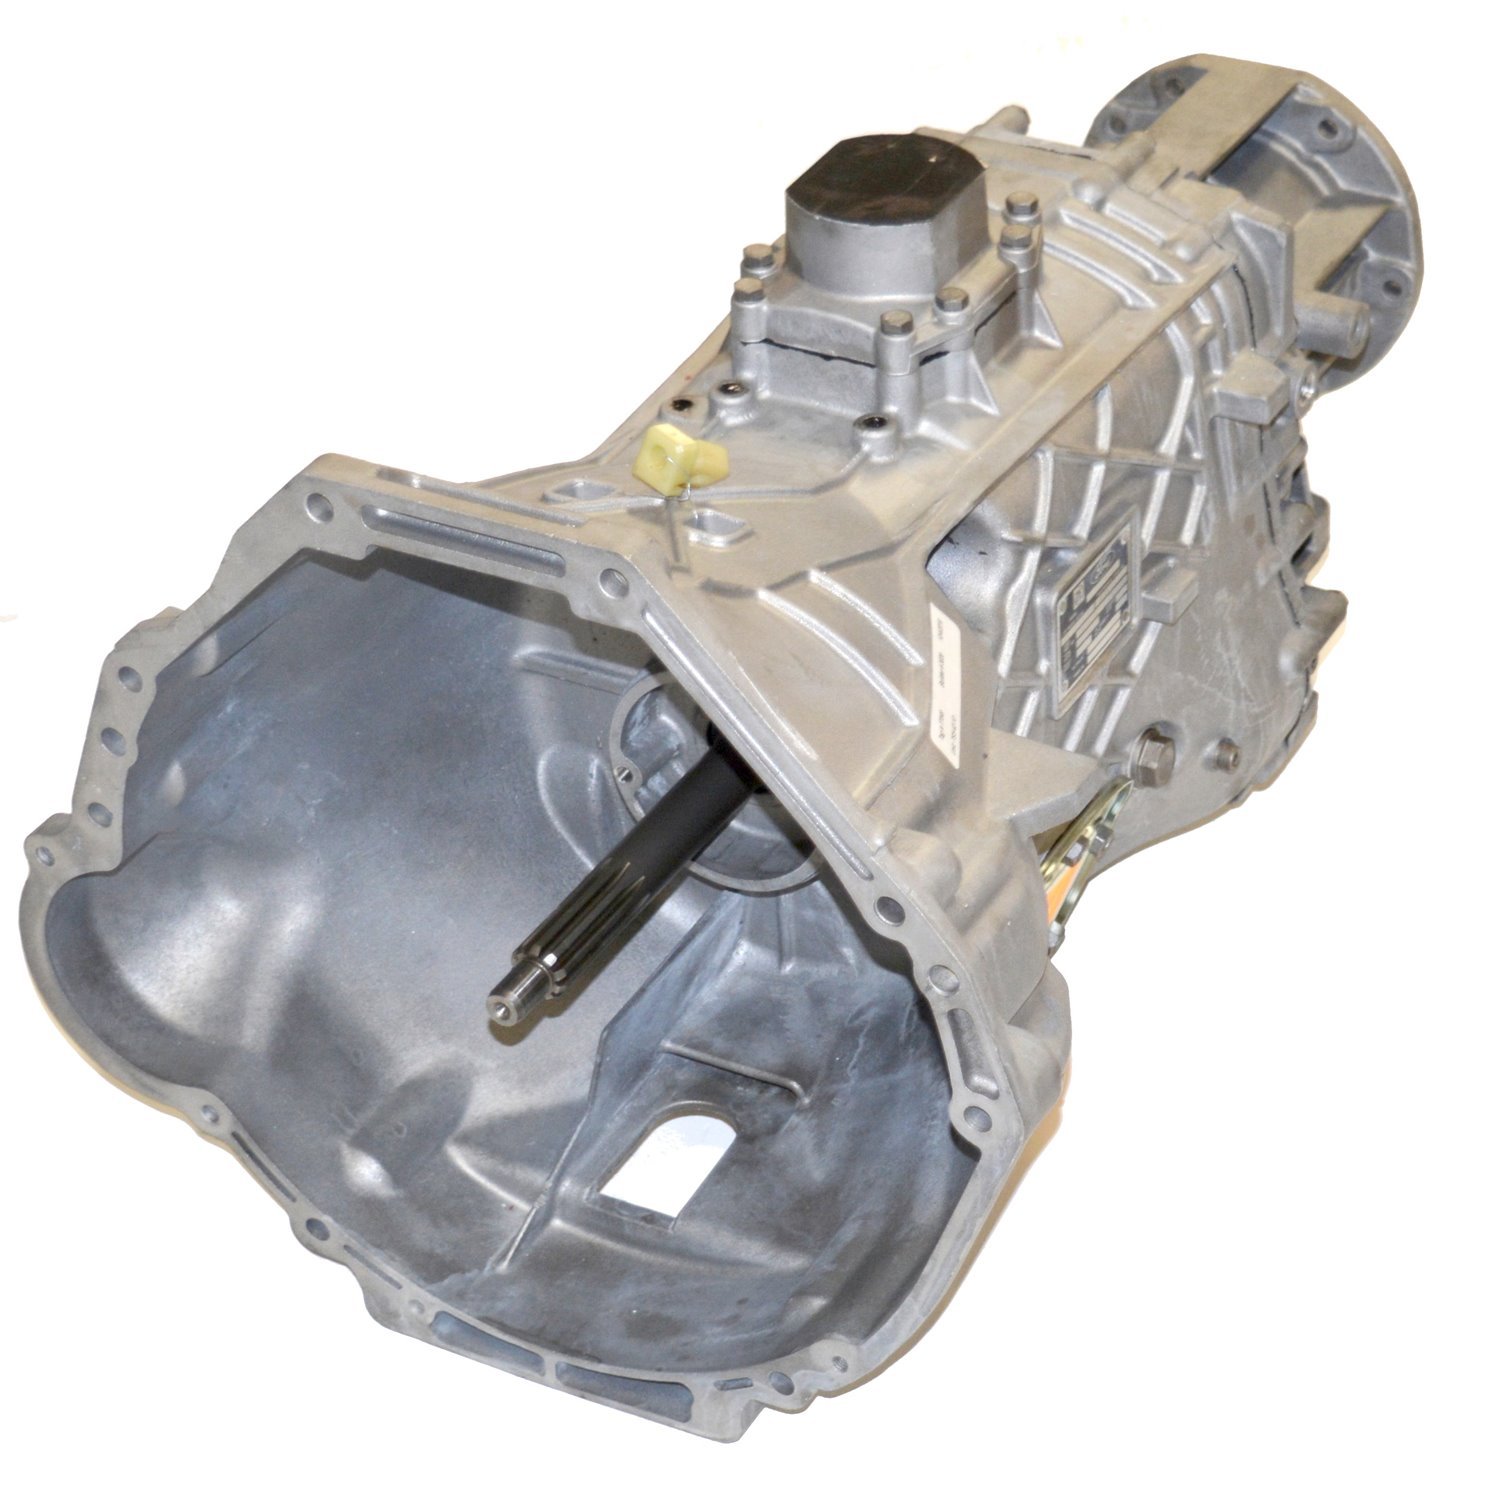 Remanufactured S5-42 Manual Transmission for Ford 87-94 F-series 4.9L & 5.8L, 4x4